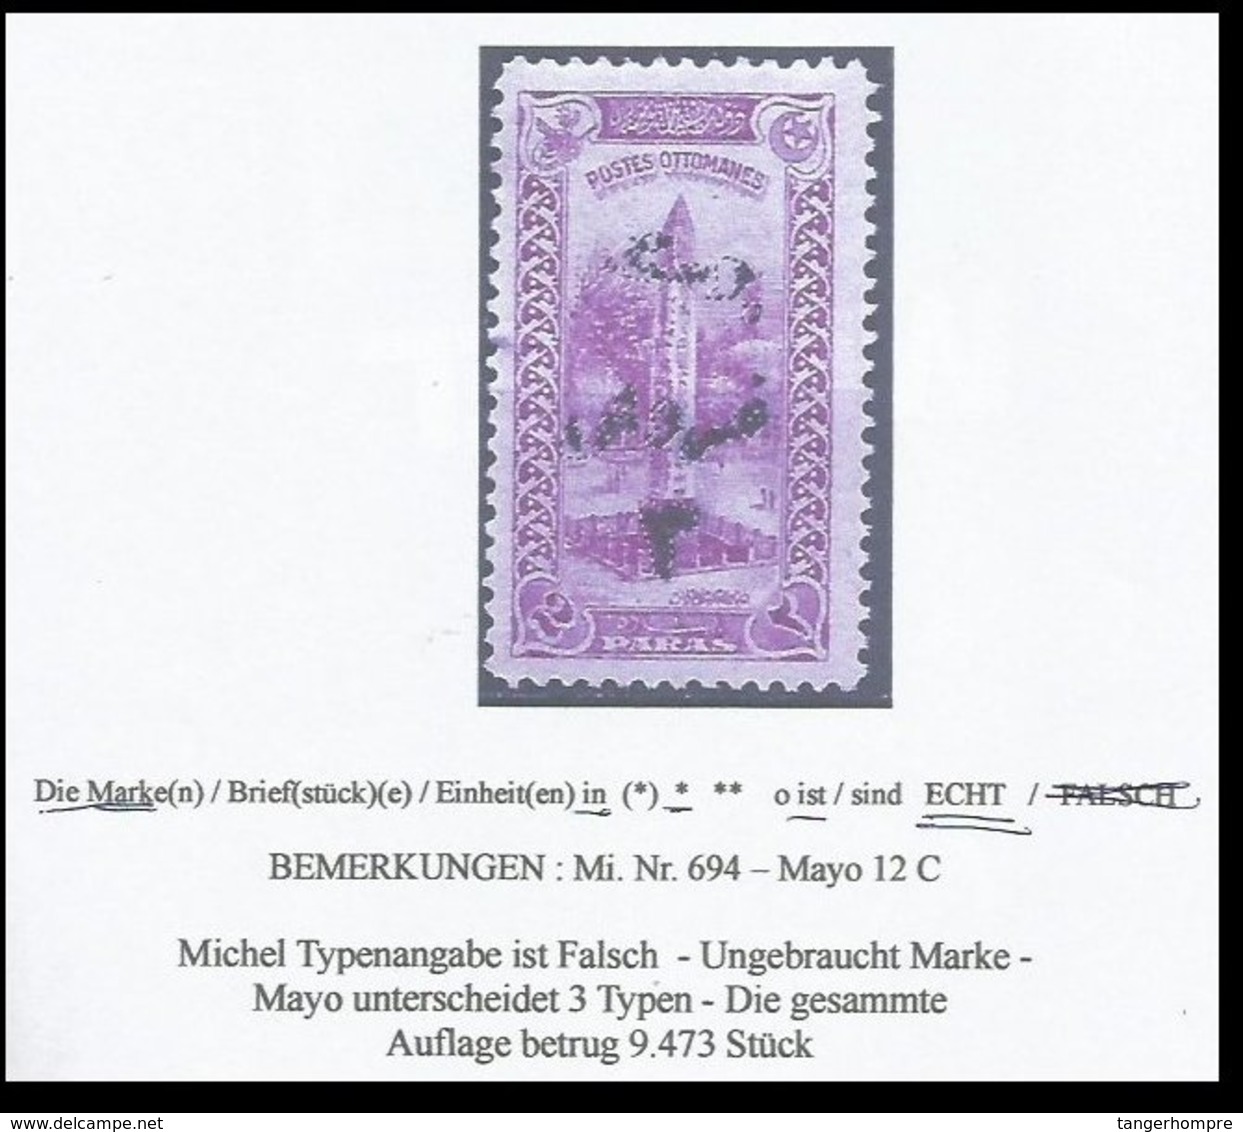 EARLY OTTOMAN SPECIALIZED FOR SPECIALIST, SEE...Mi. Nr. 694 - Mayo 12 C In Ungebraucht - 1920-21 Anatolia